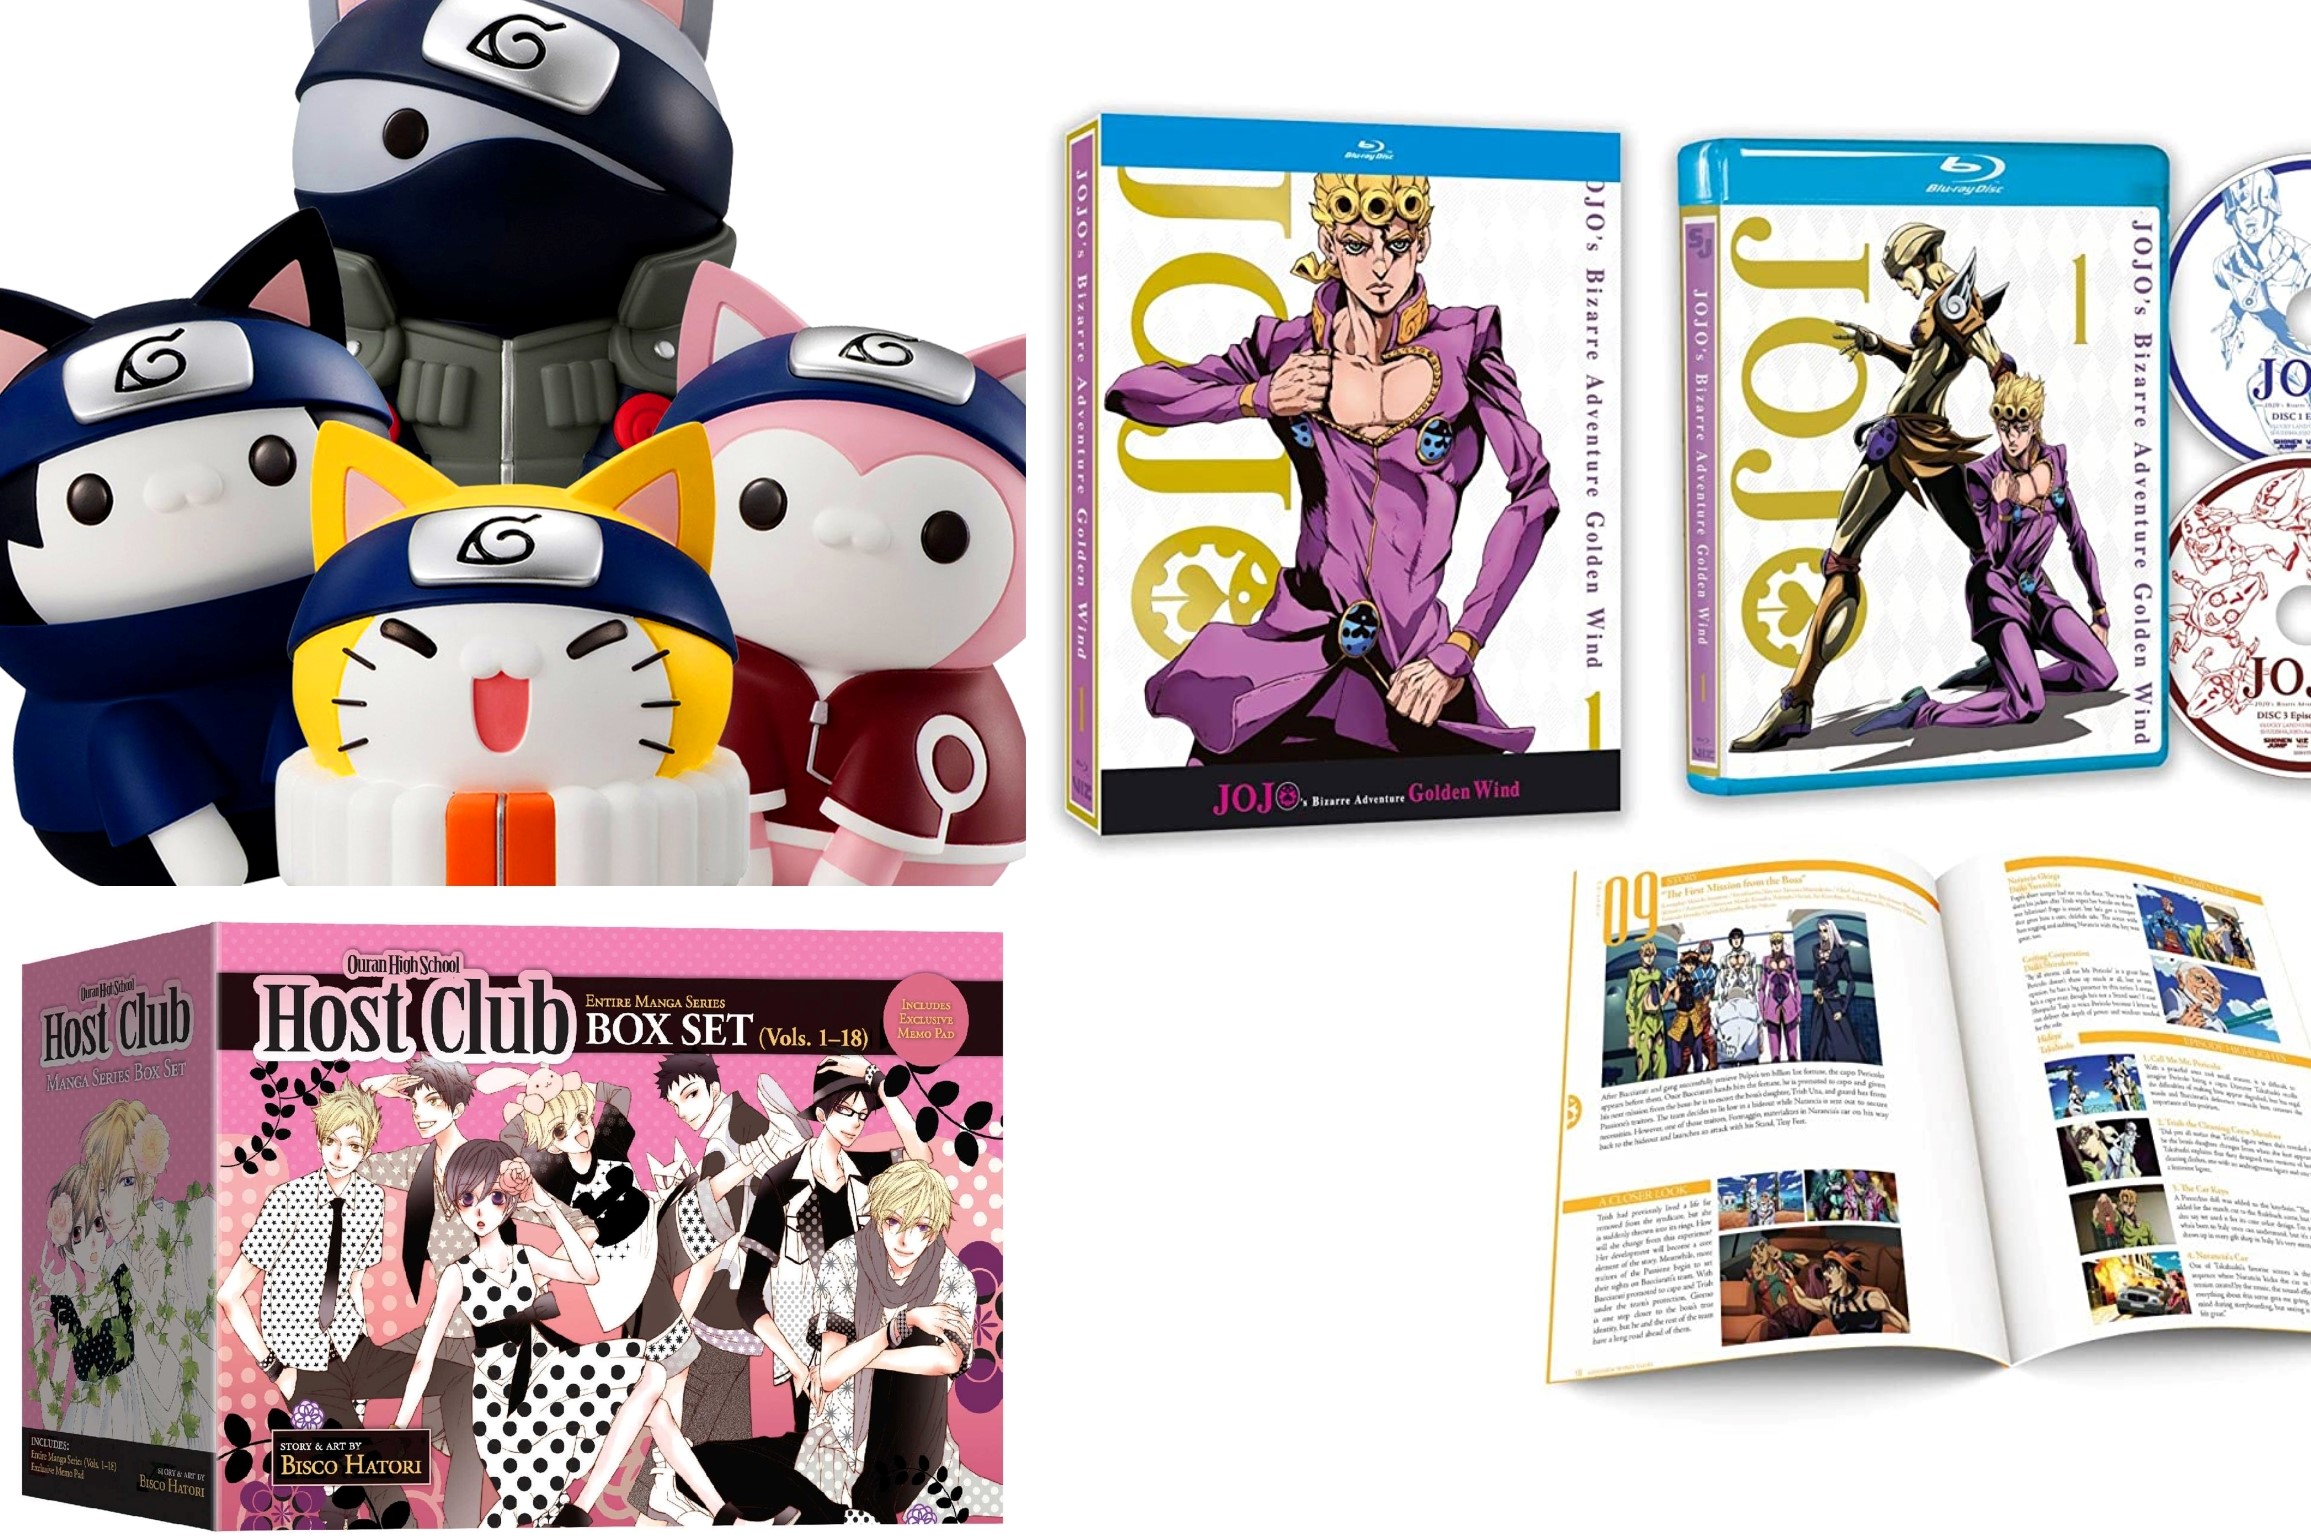 5 Best Anime and Manga Cyber Monday 2021 Deals